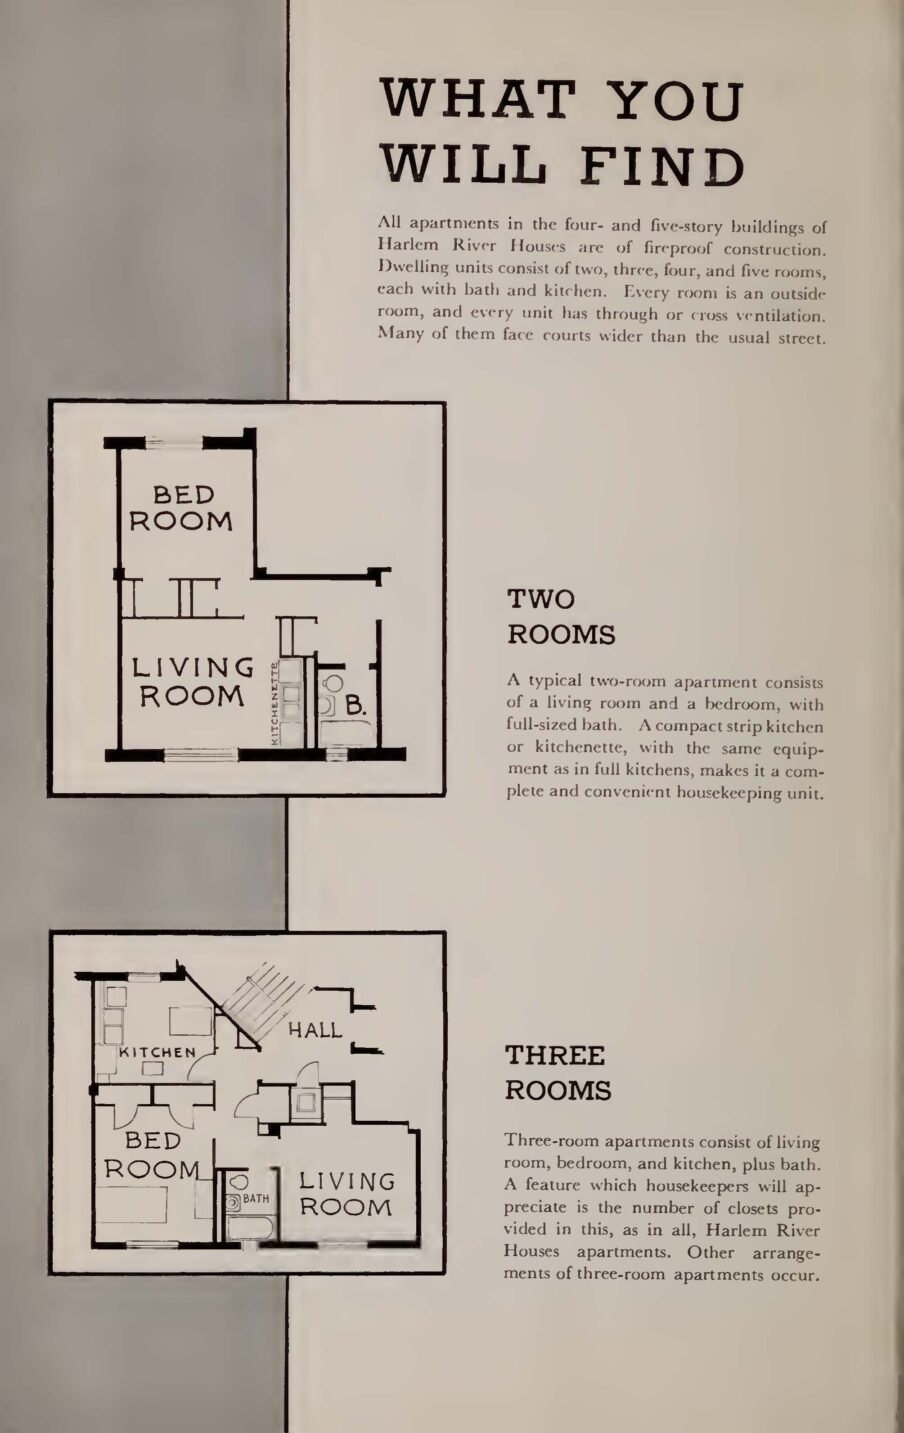 Pages from a government brochure describing the background conditions and built aspects of the new public housing development